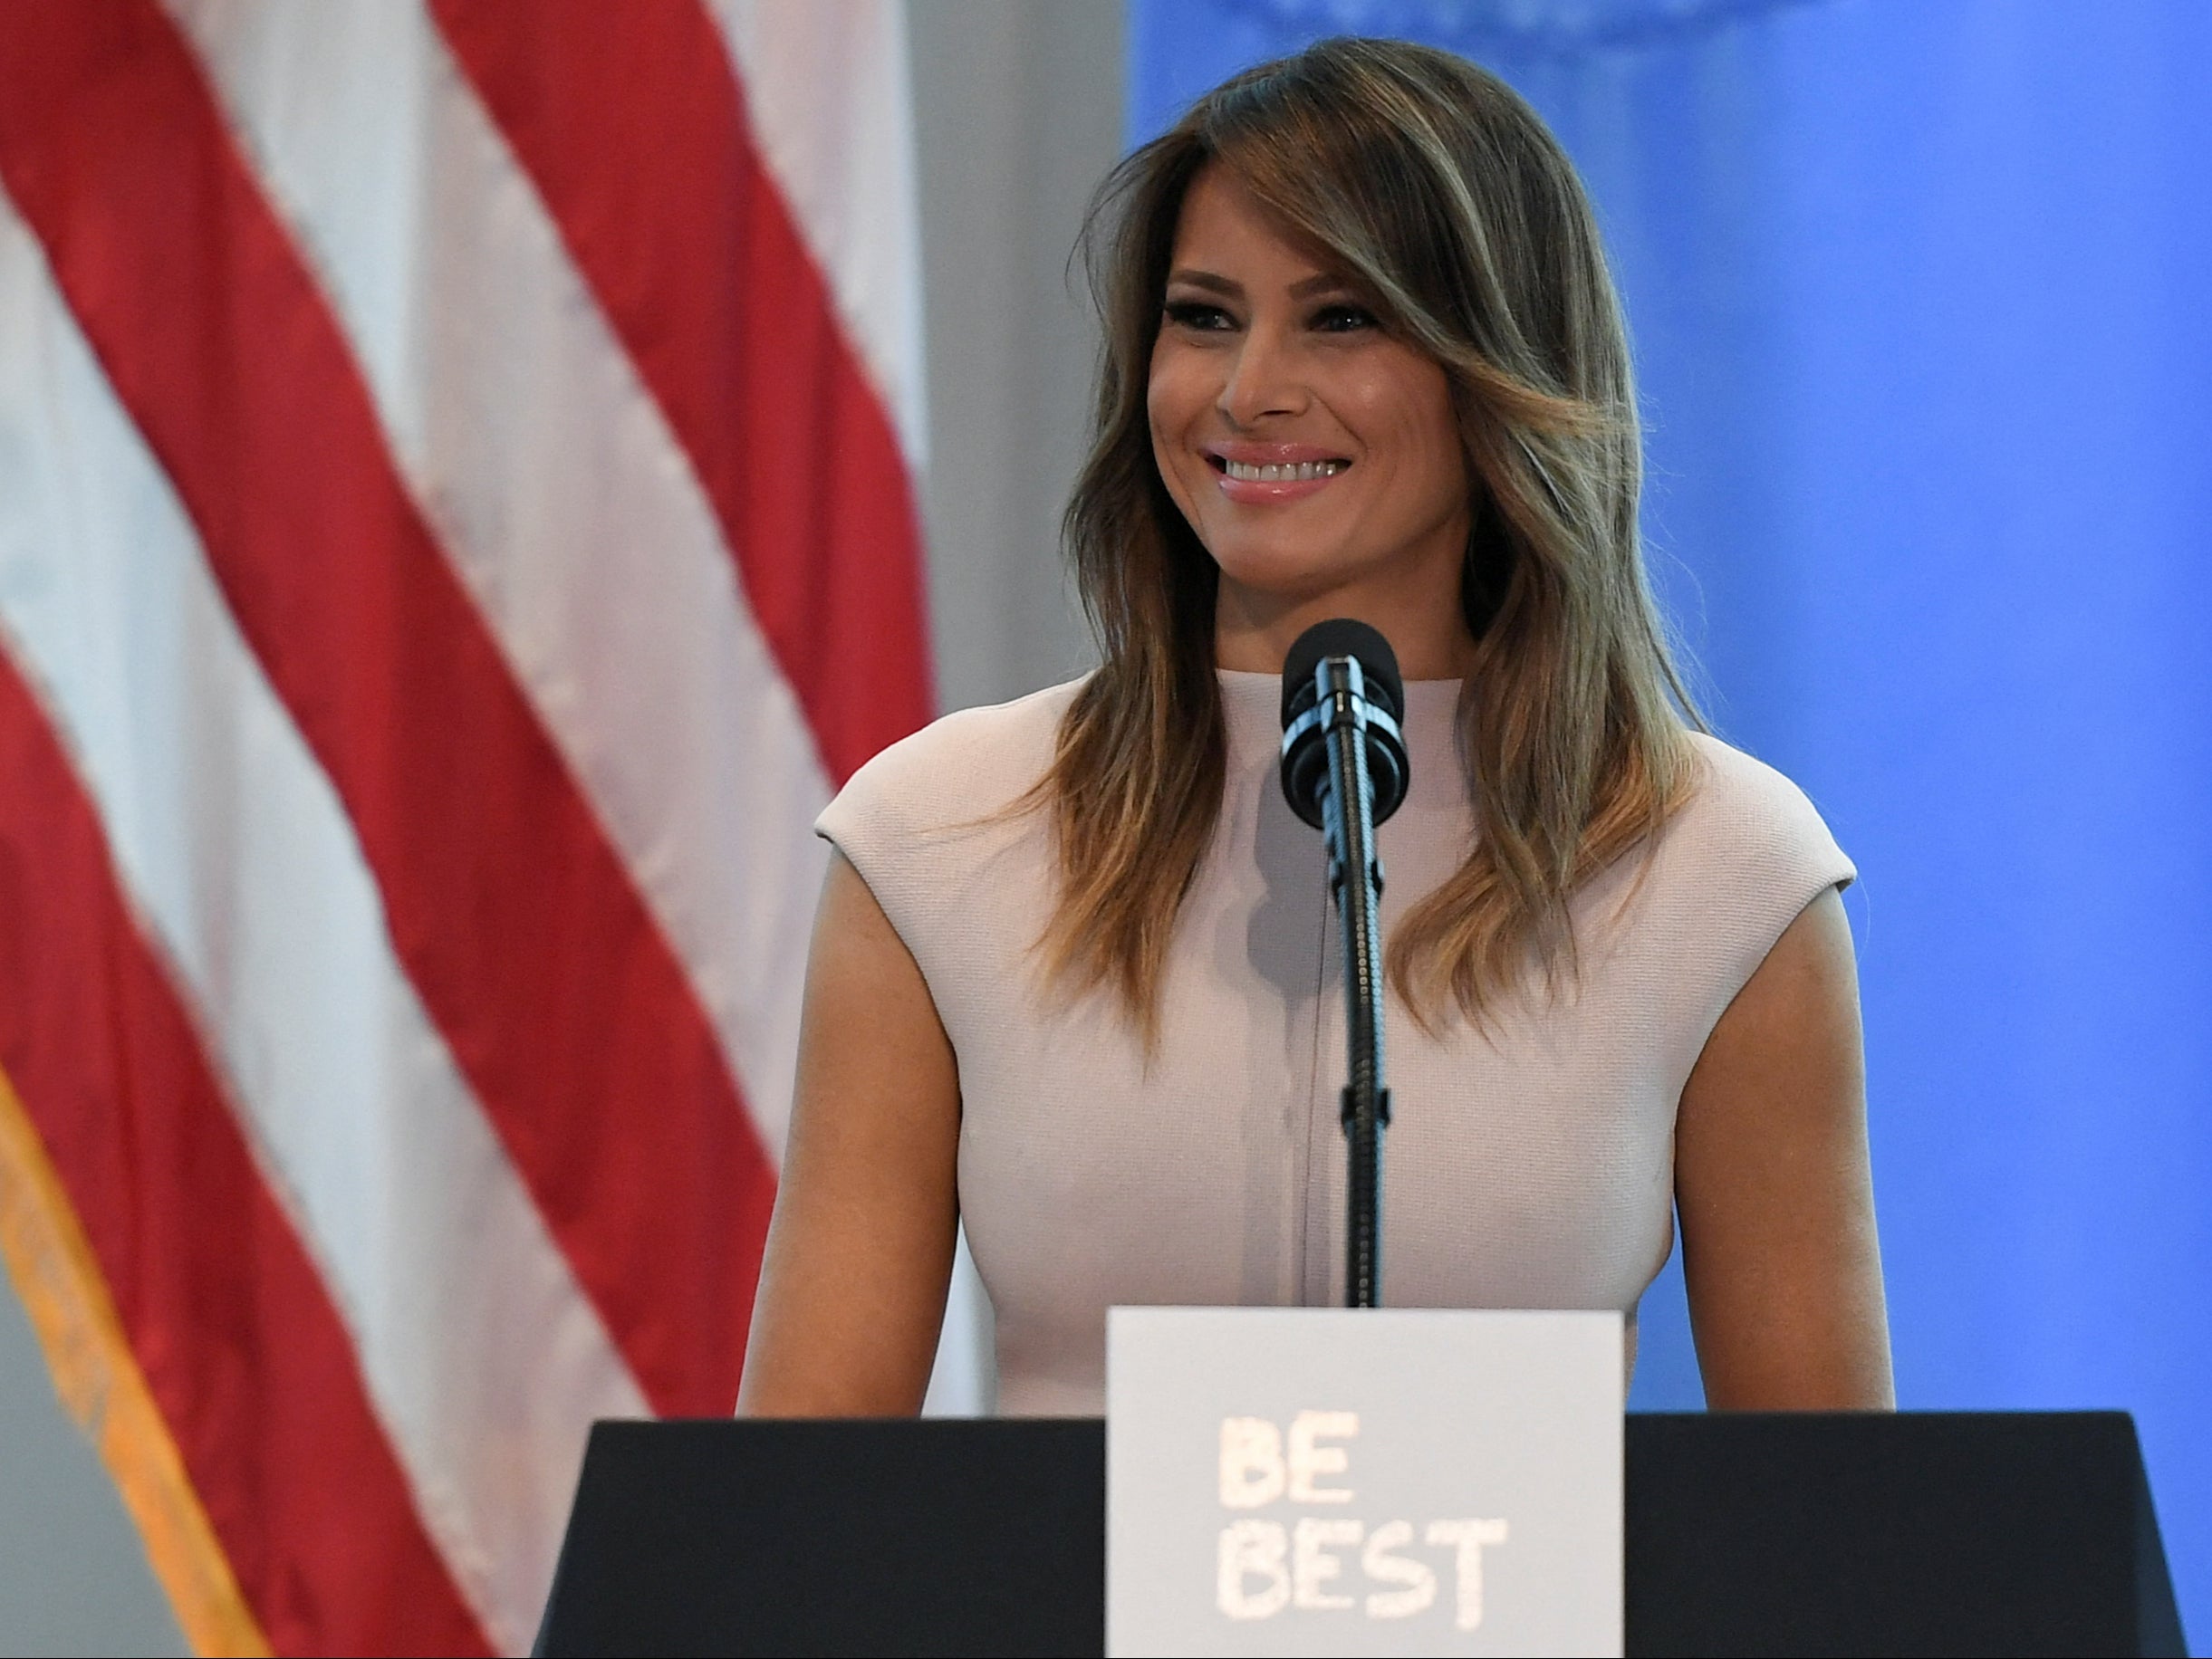 File. Report accuses Melania Trump of buying her own artwork on NFT platform she launched